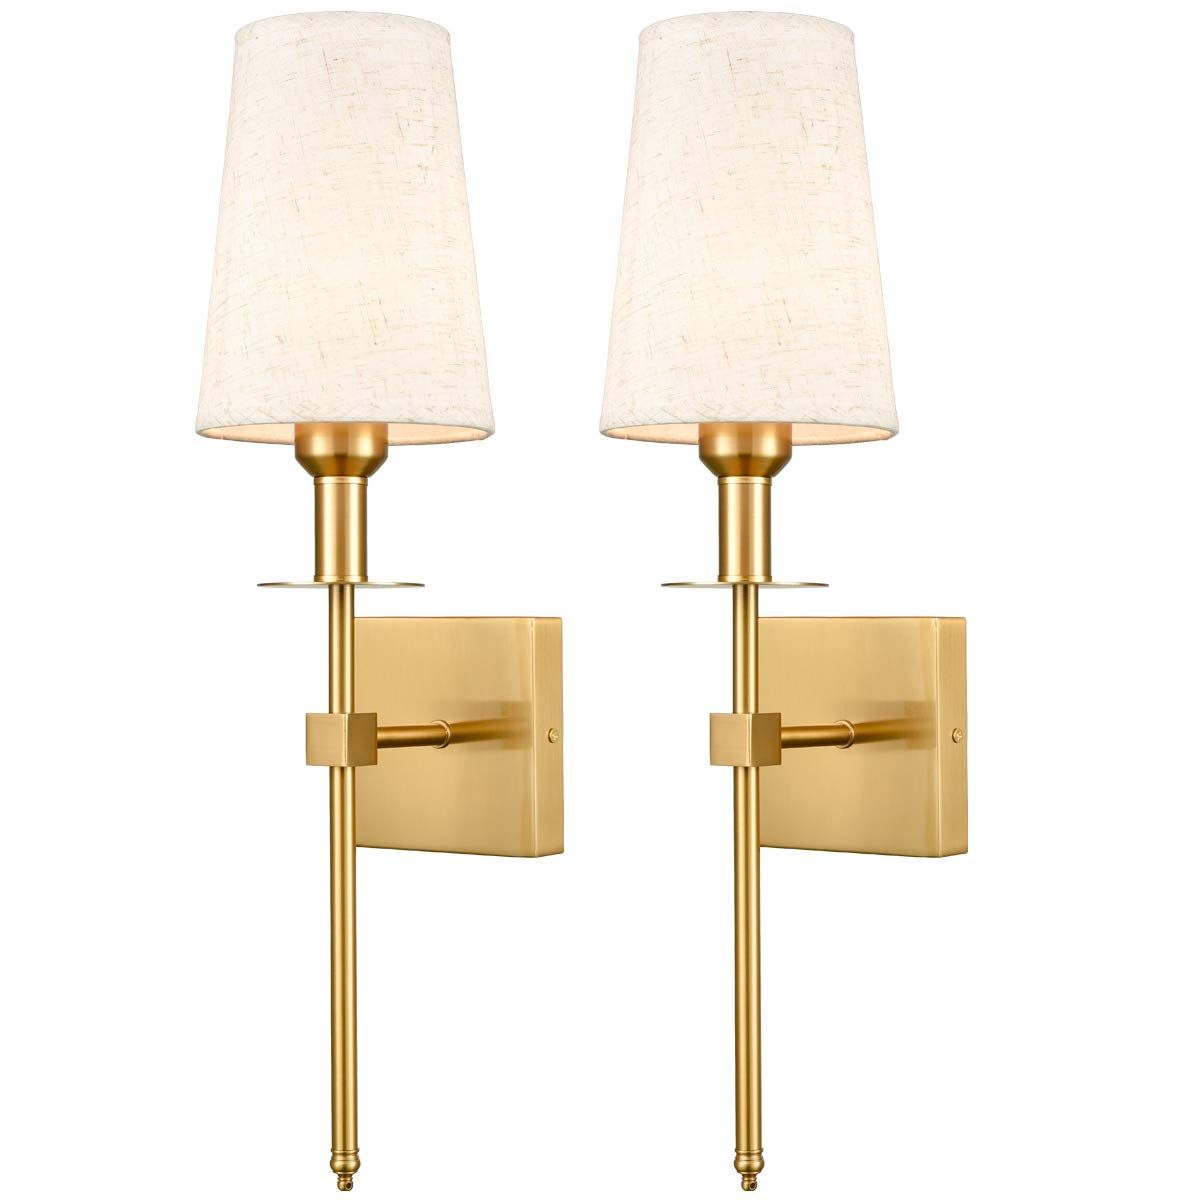 Gold Wall Sconce Sets of 2 Beige Linen Shade Plug-in Porch Light Modern Sconces Brass Wall Lamp Ligh | Amazon (US)